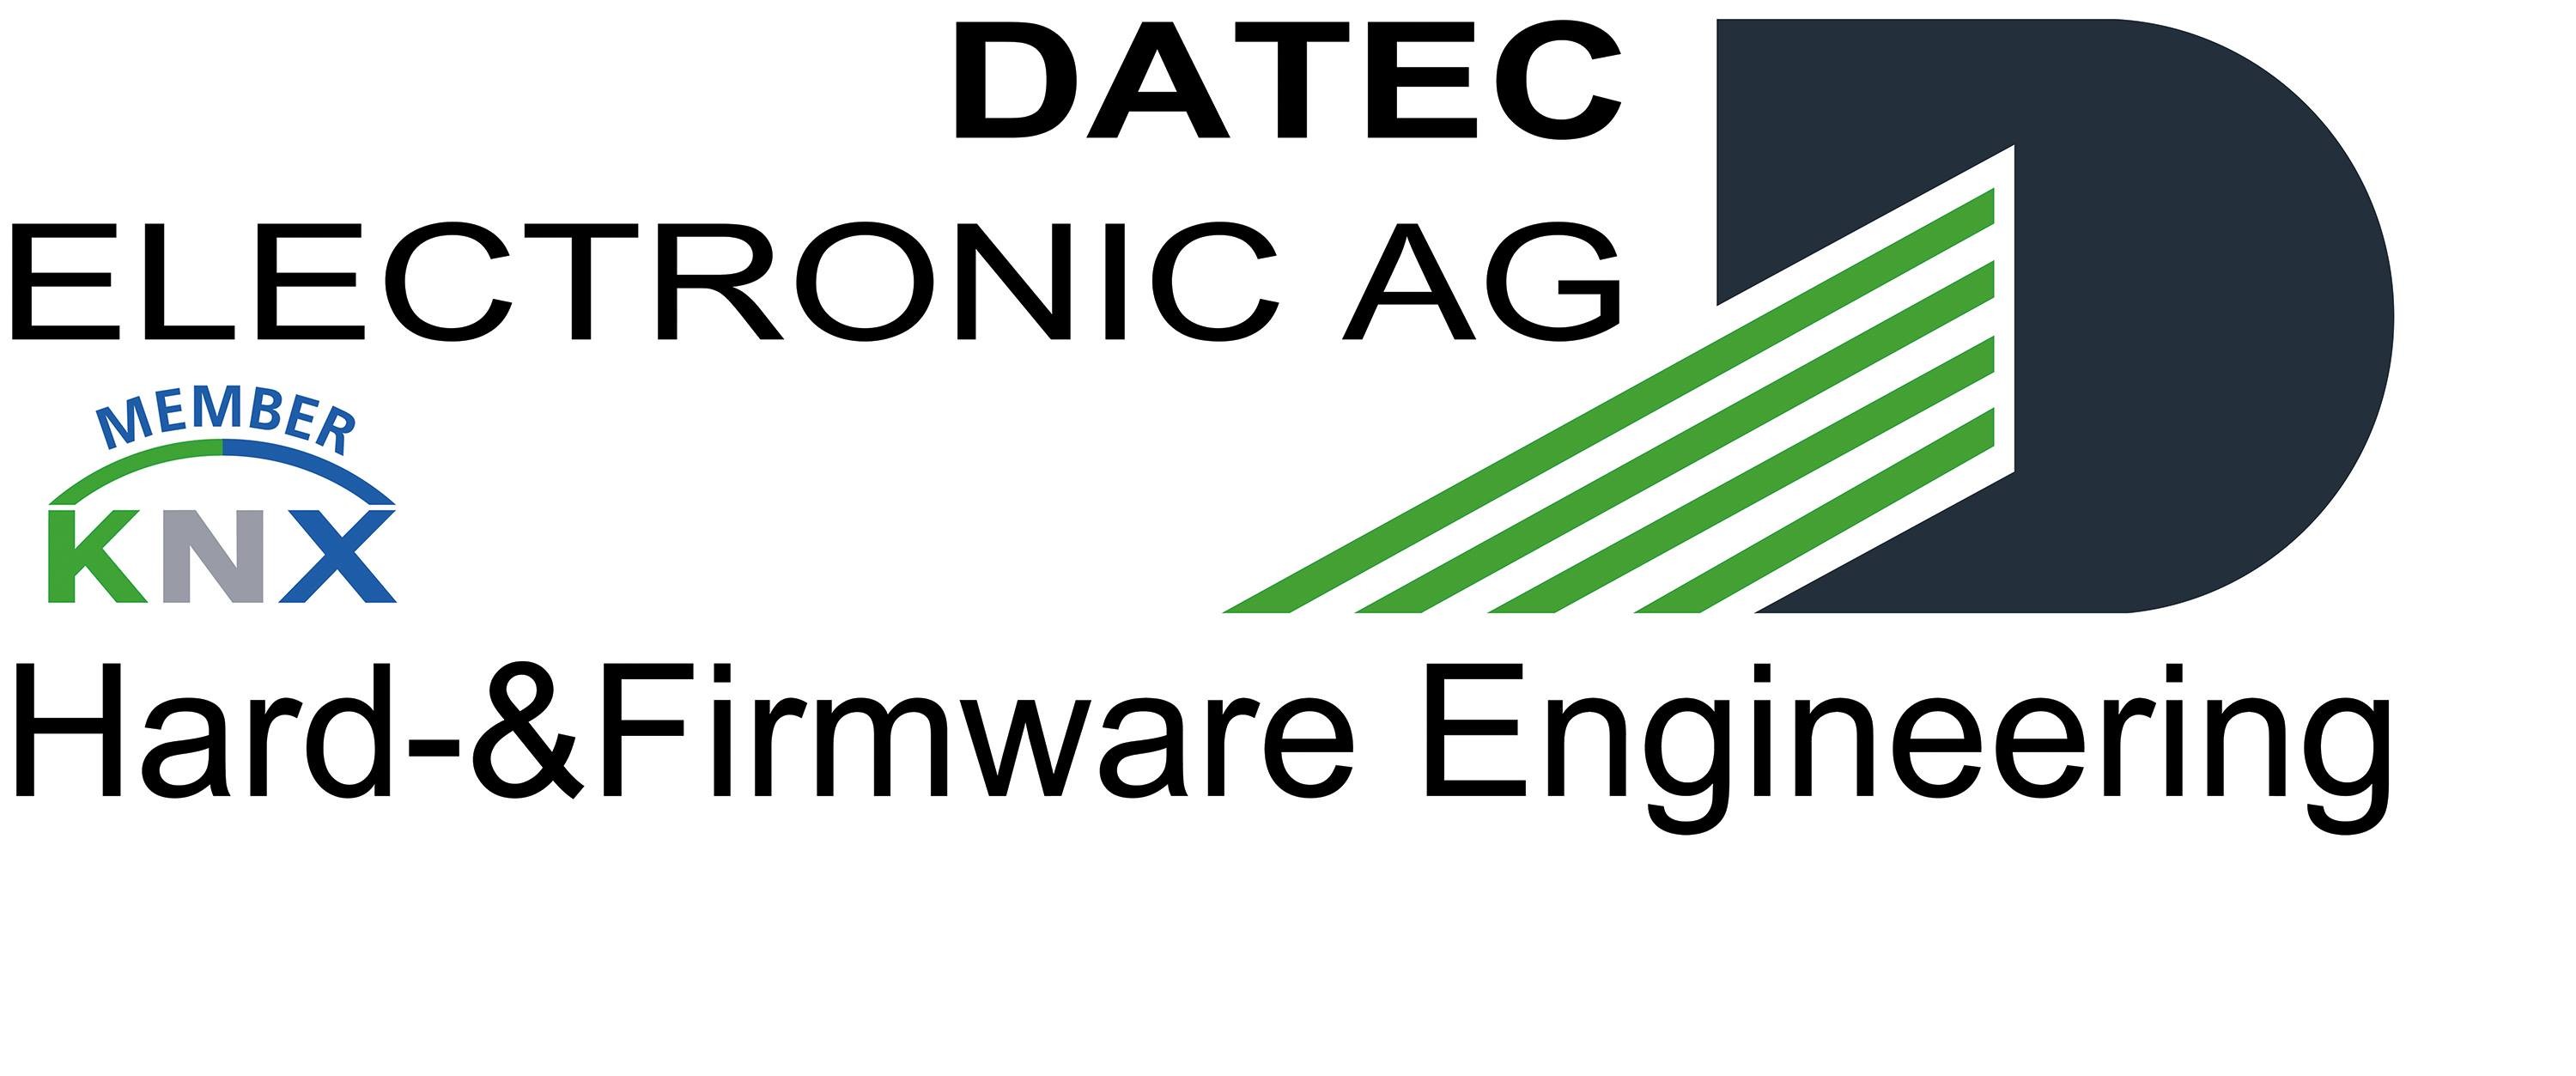 DATEC ELECTRONIC AG